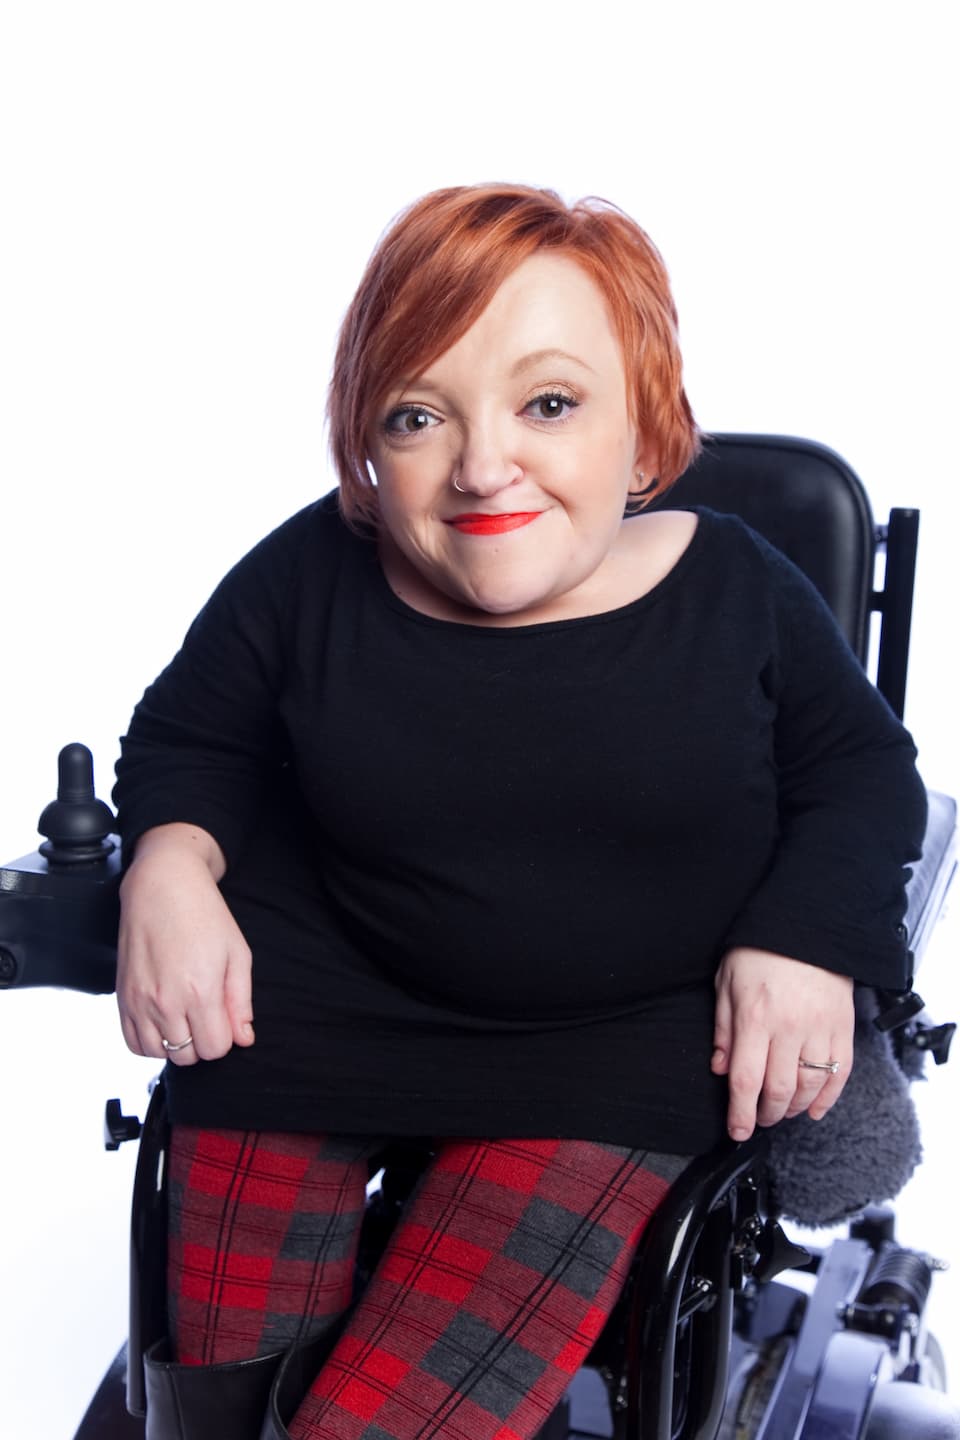 Studio photo of Stella in her wheelchair smiling at the camera. She's wearing a black top and red tartan pants.